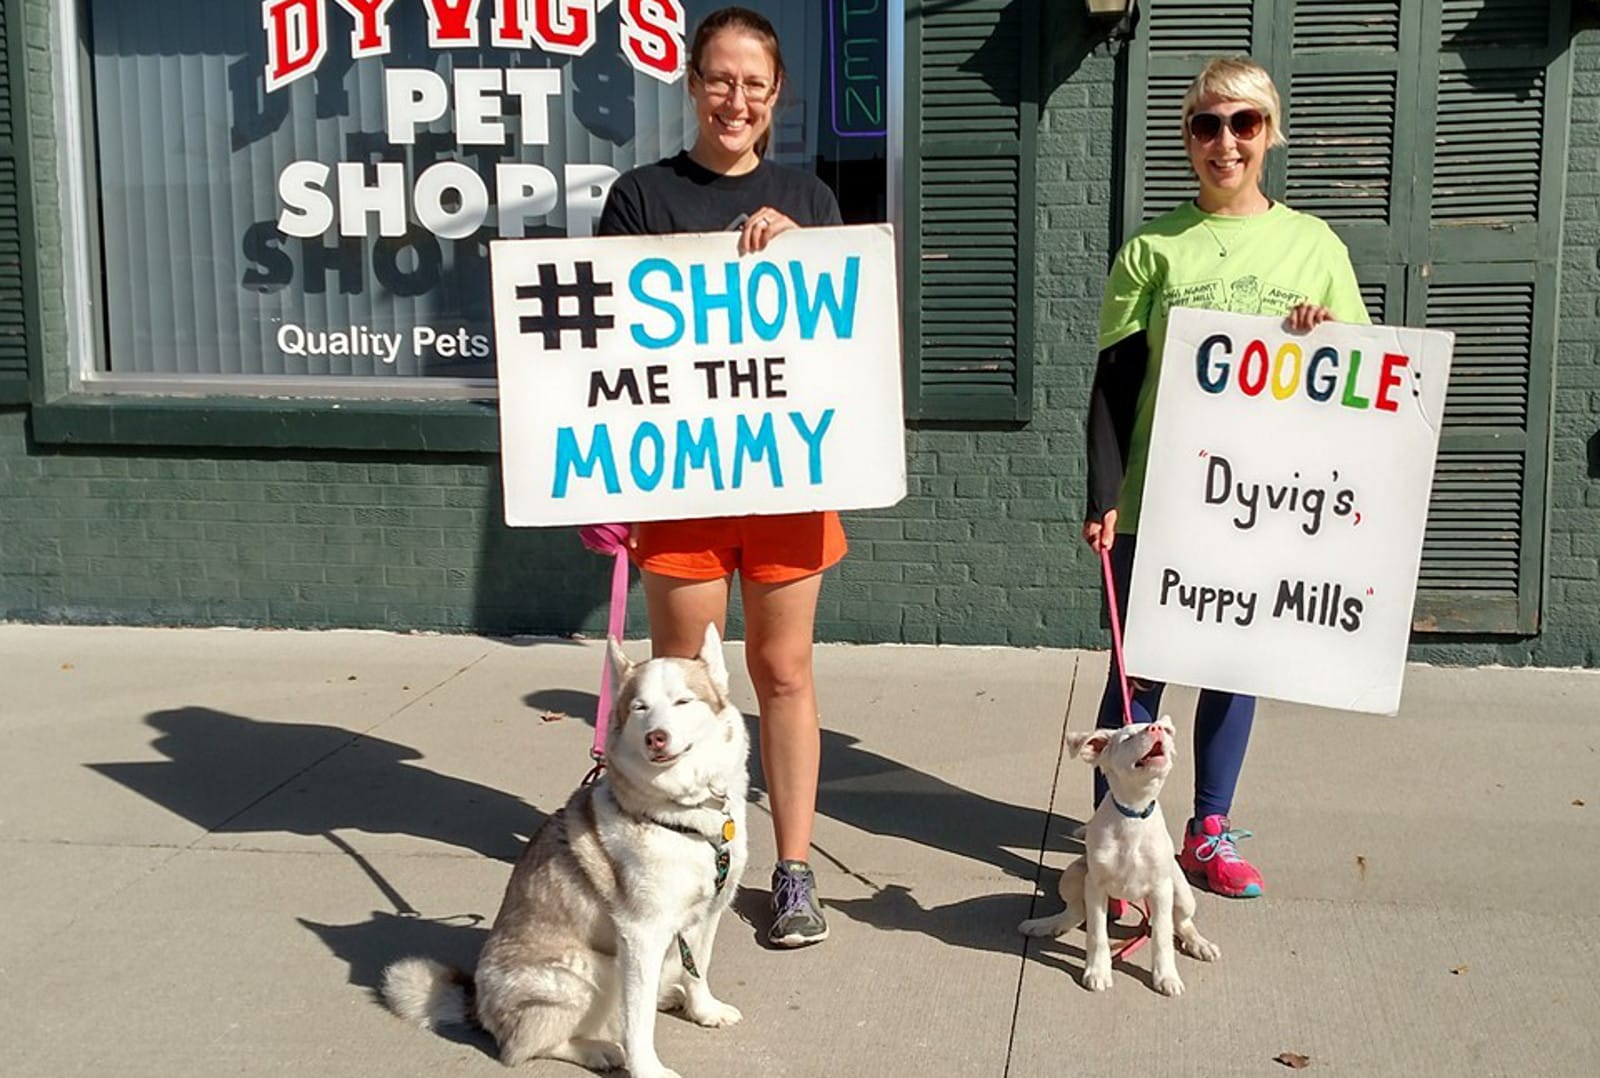 These Incredible Activists Staged a Month-Long Protest to Raise Awareness for Puppy Mill Dogs